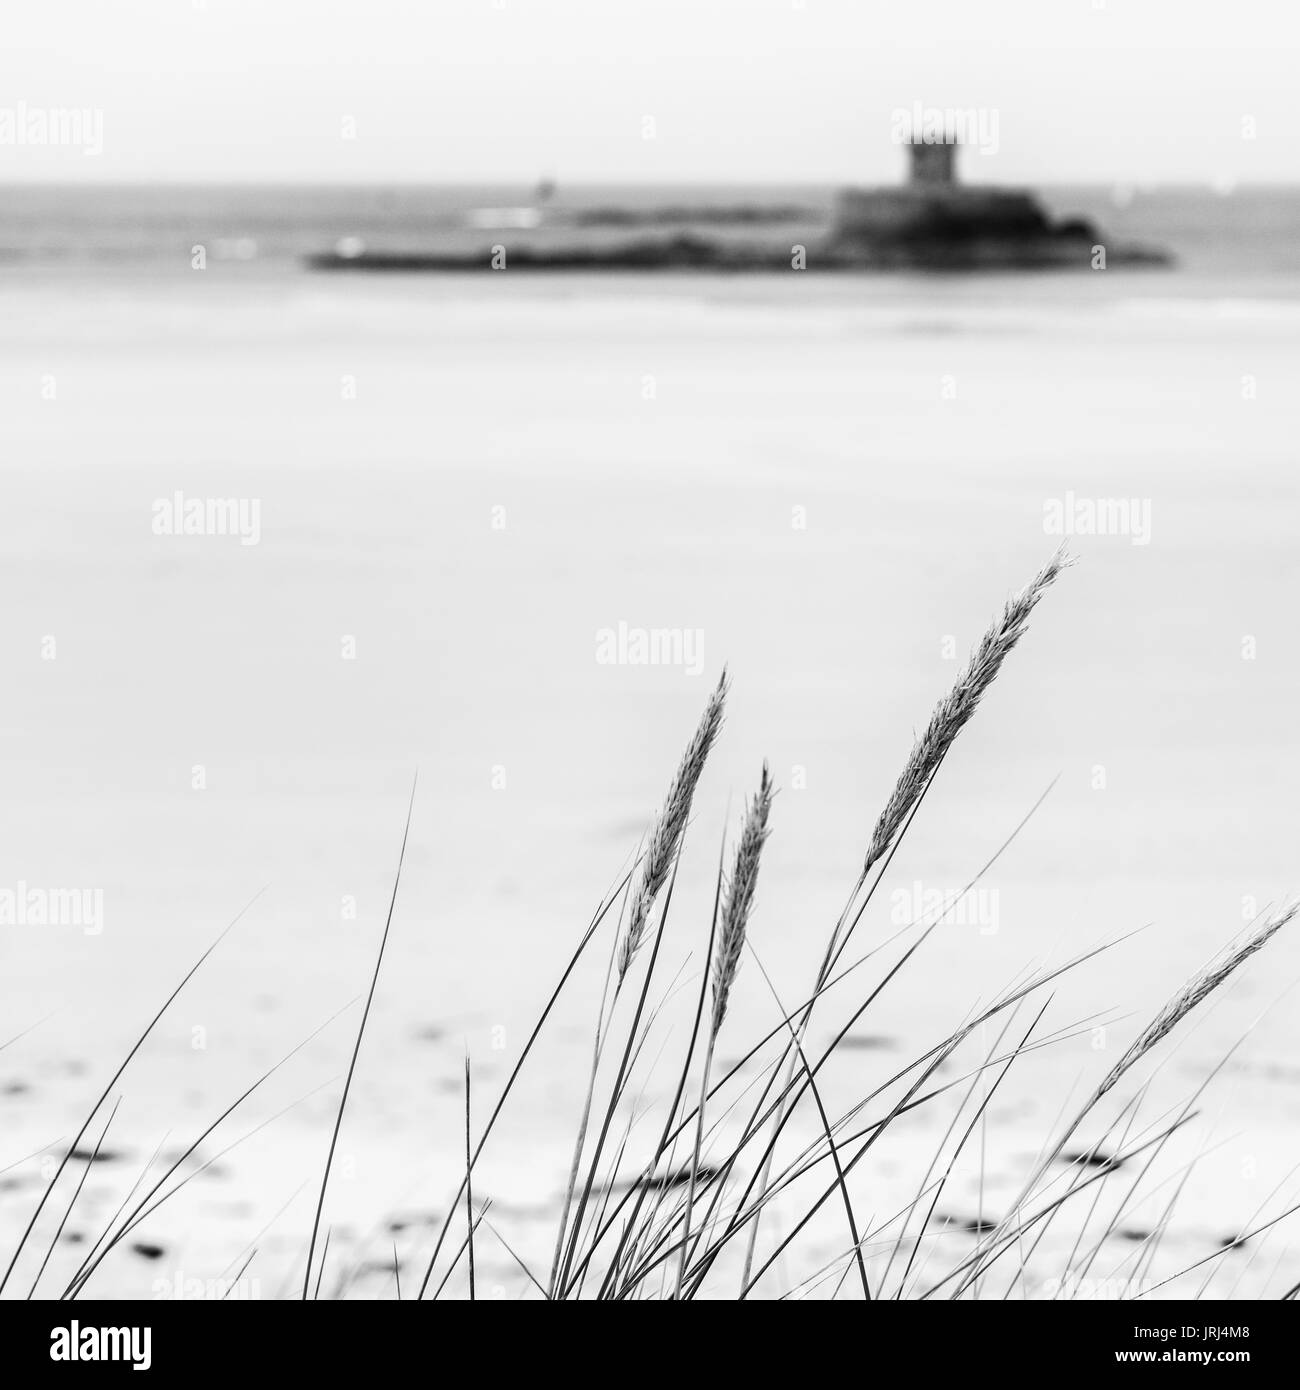 Black and white image of grasses in sand dunes at St Ouens Bay with La Rocco Tower in the background, Jersey, Channel Islands Stock Photo